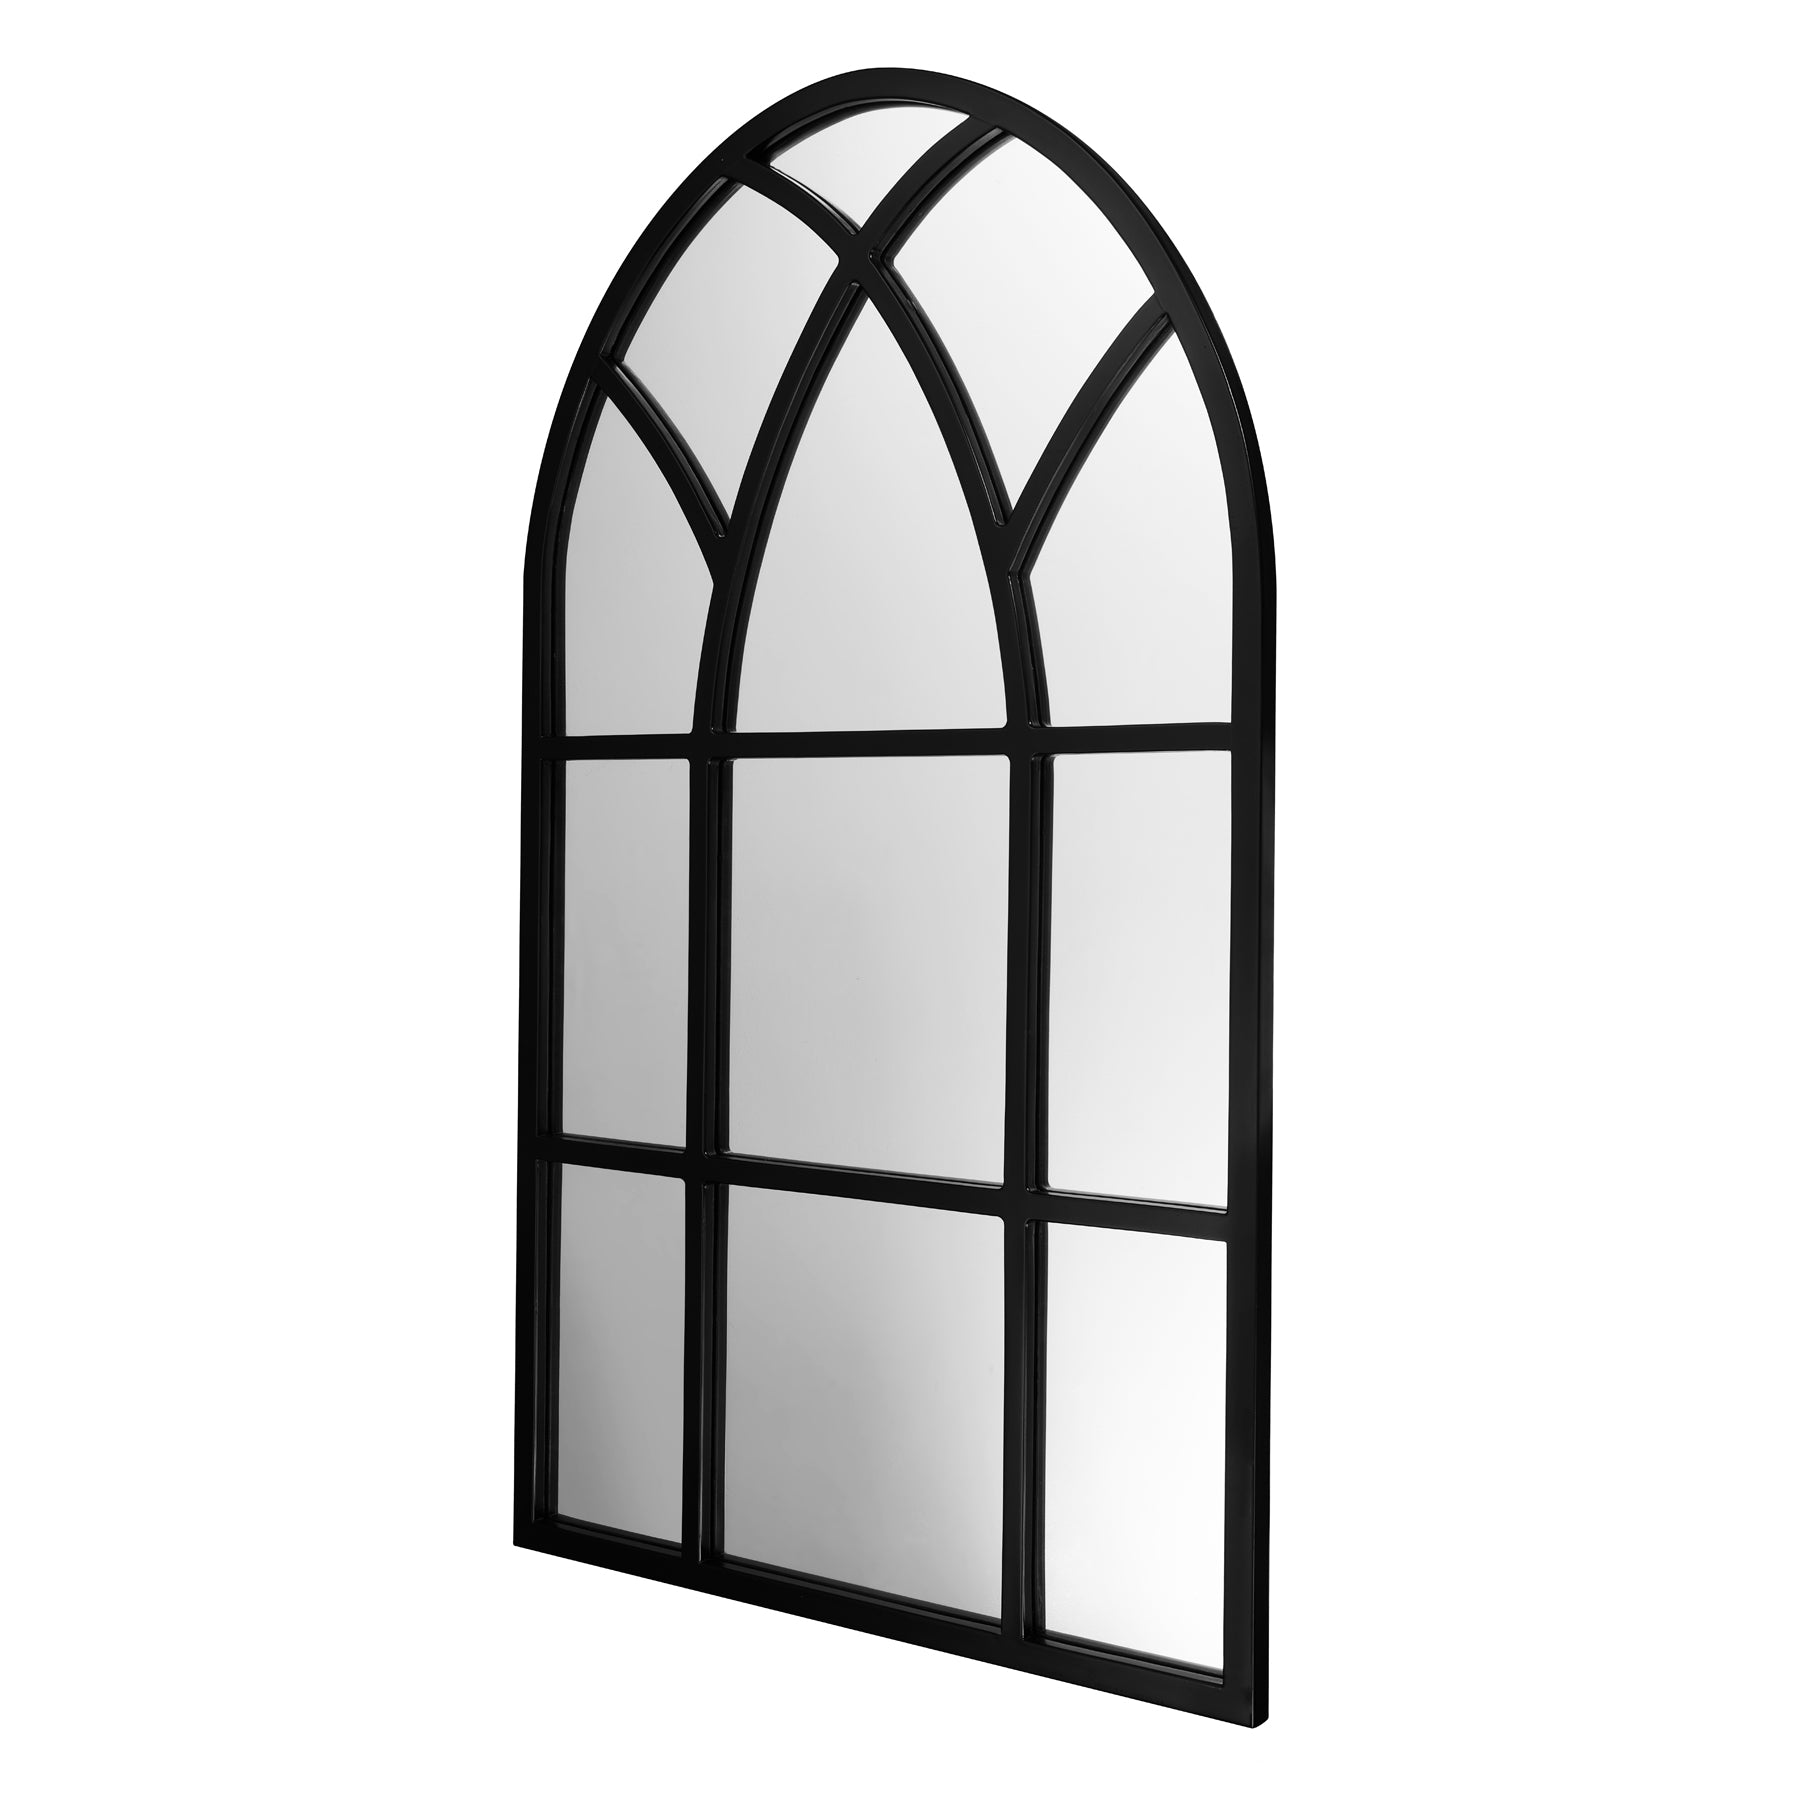 Cathedral Arch Mirror - Black - Paramount Mirrors and Prints